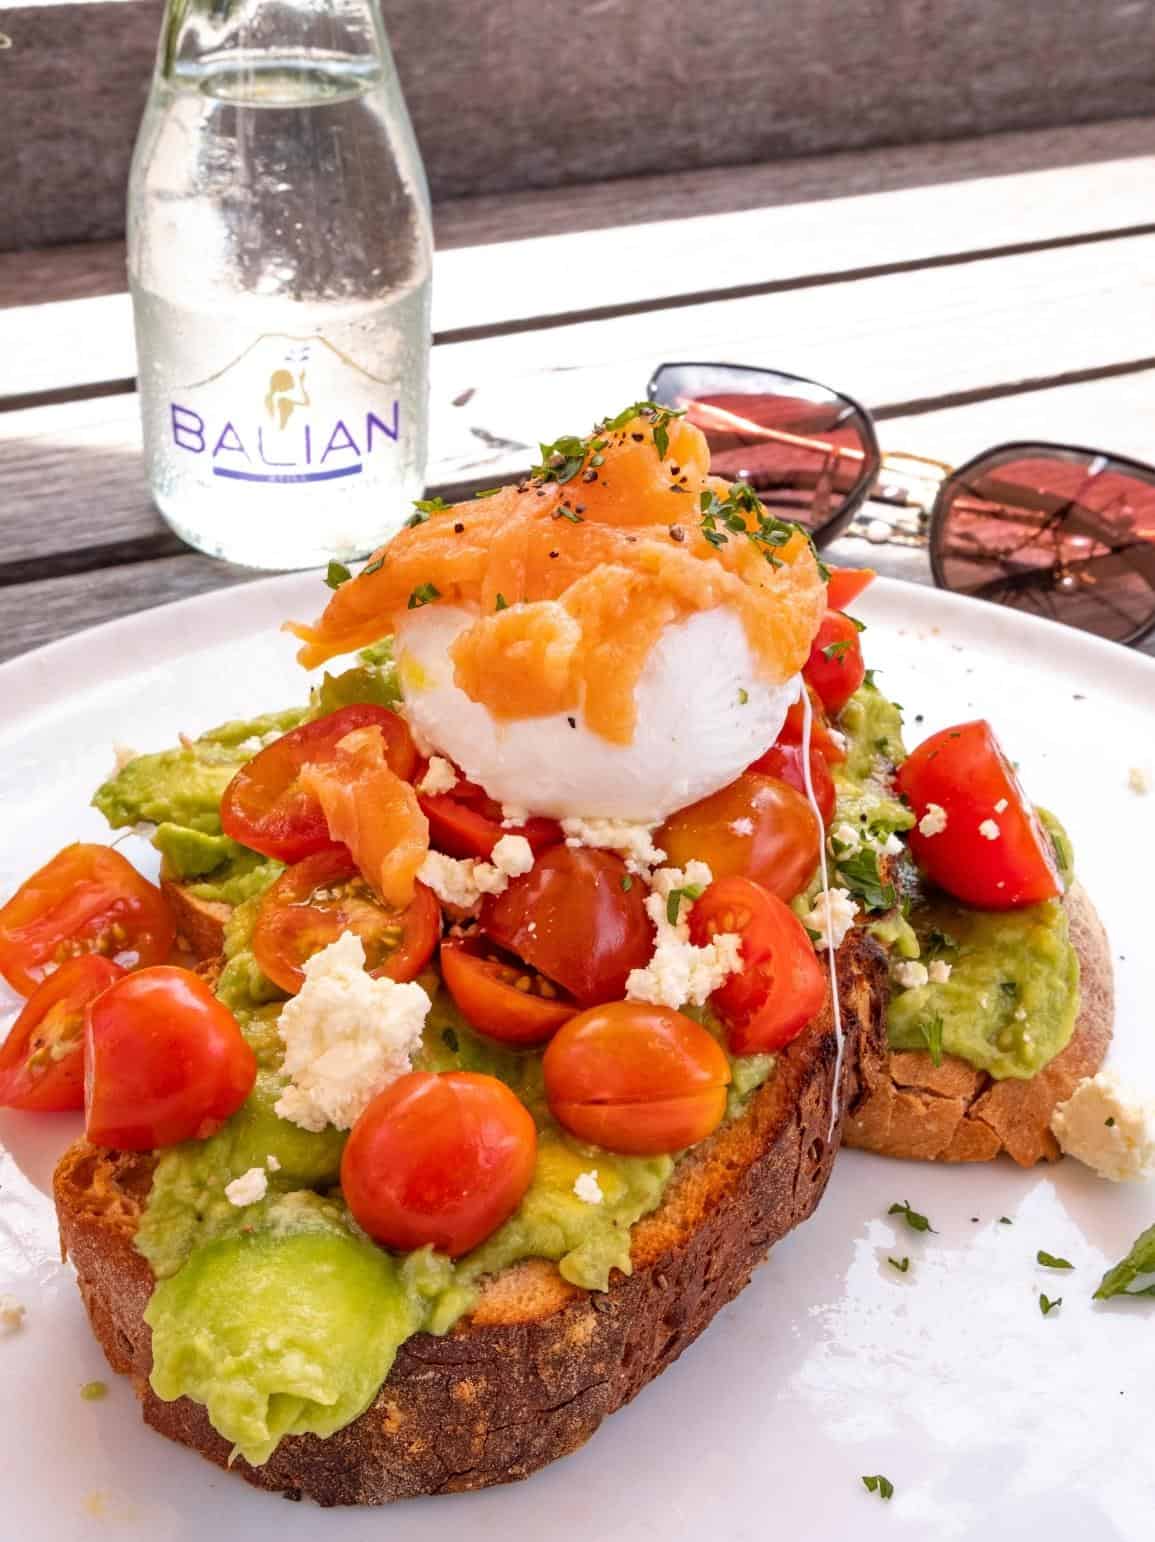 Avocado toast piled high with cherry tomatoes, feta, smoked salmon and a poached egg